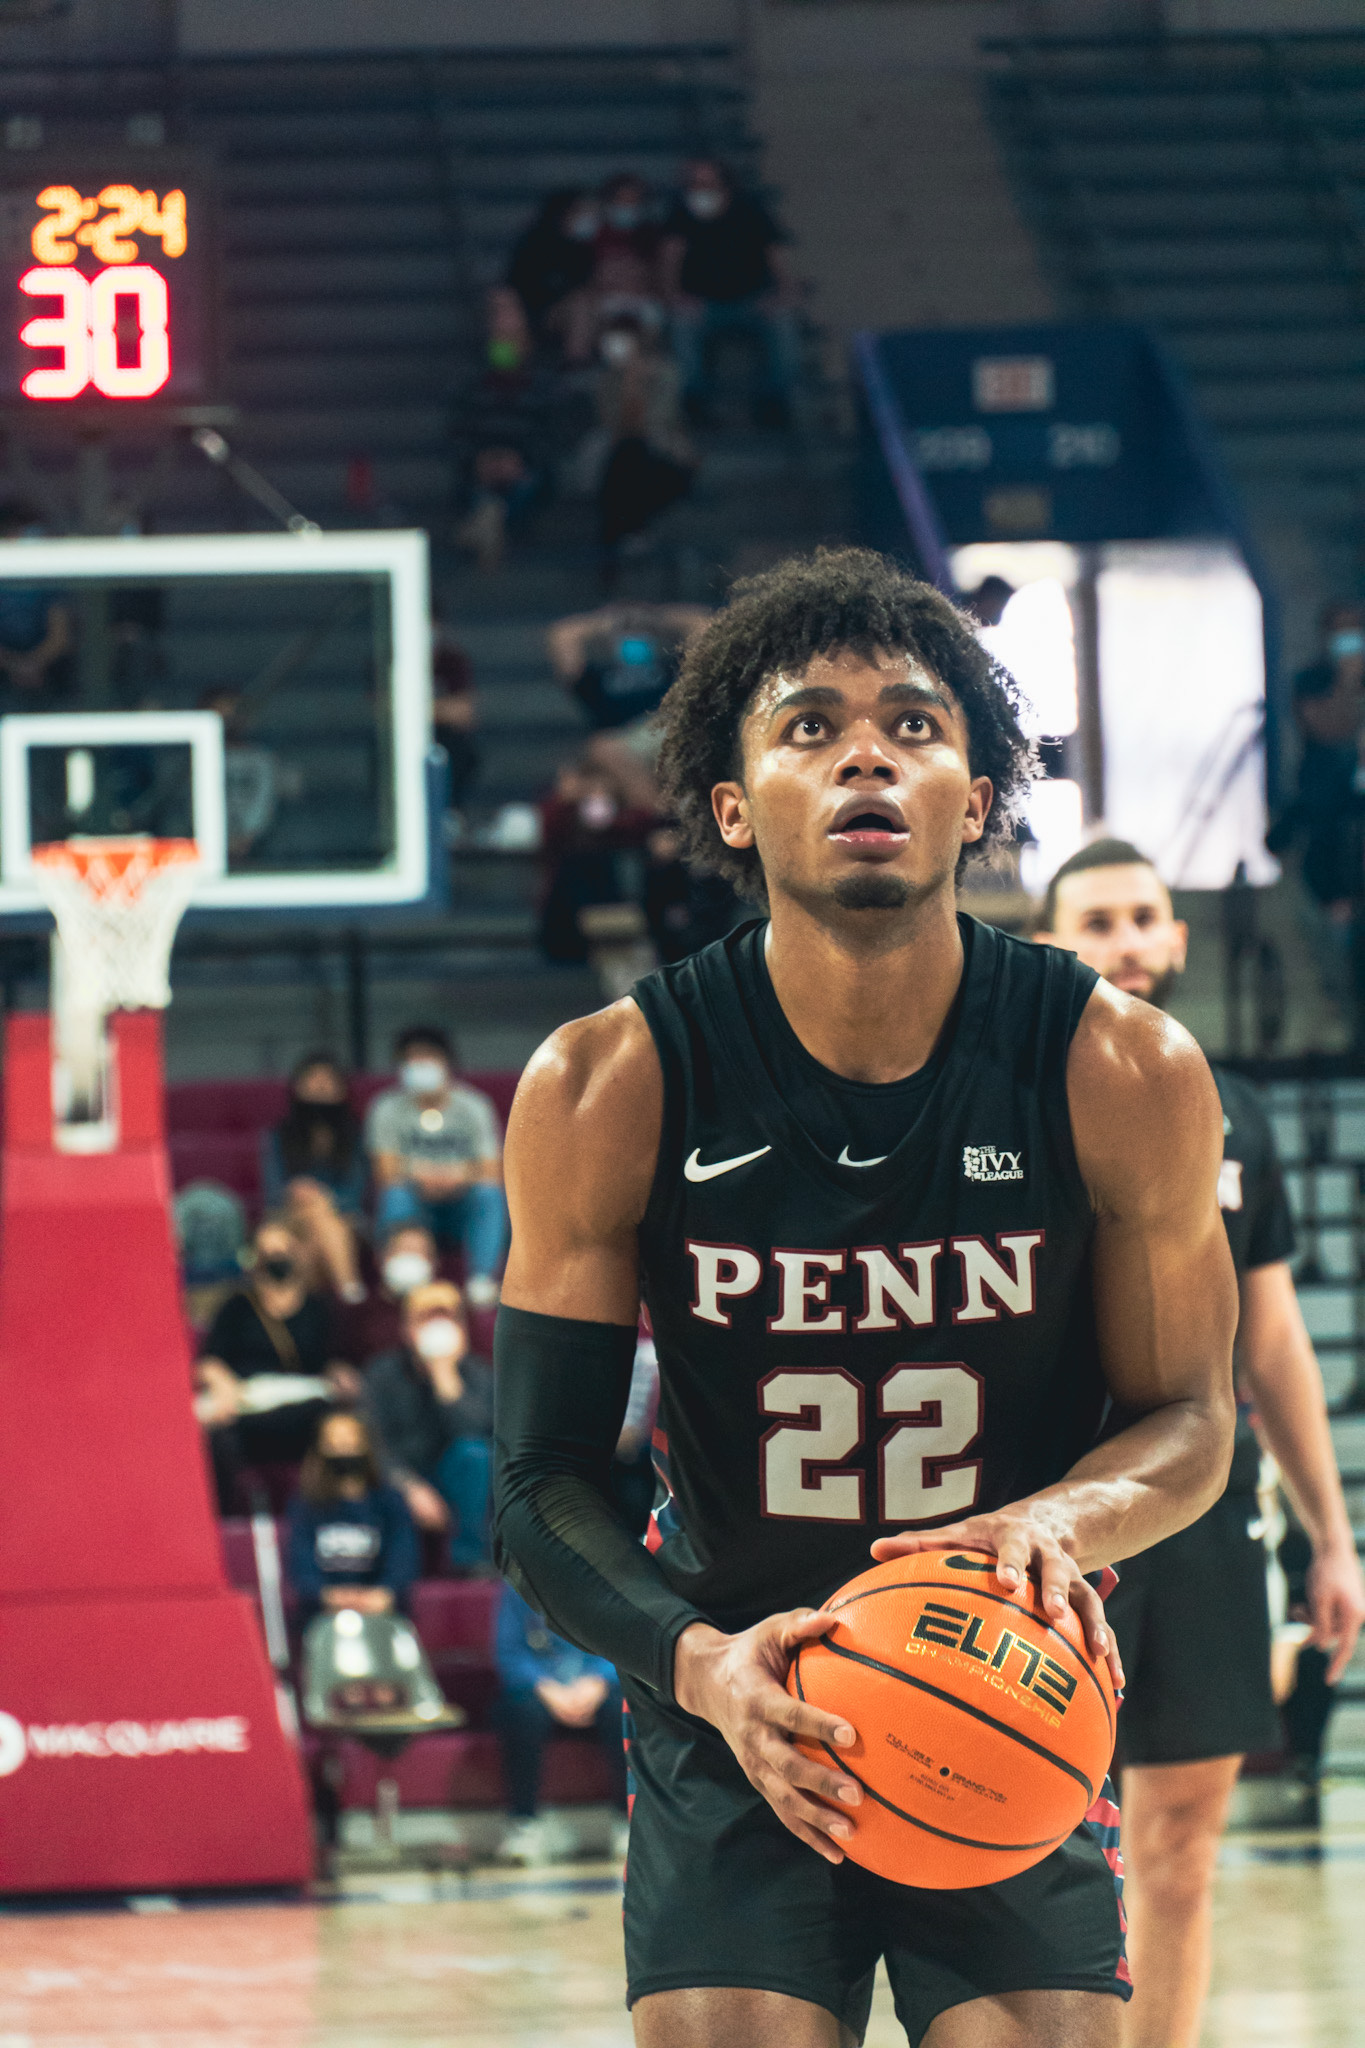 Lucas Monroe, wearing a jersey that says "Penn 22," focuses on a shot